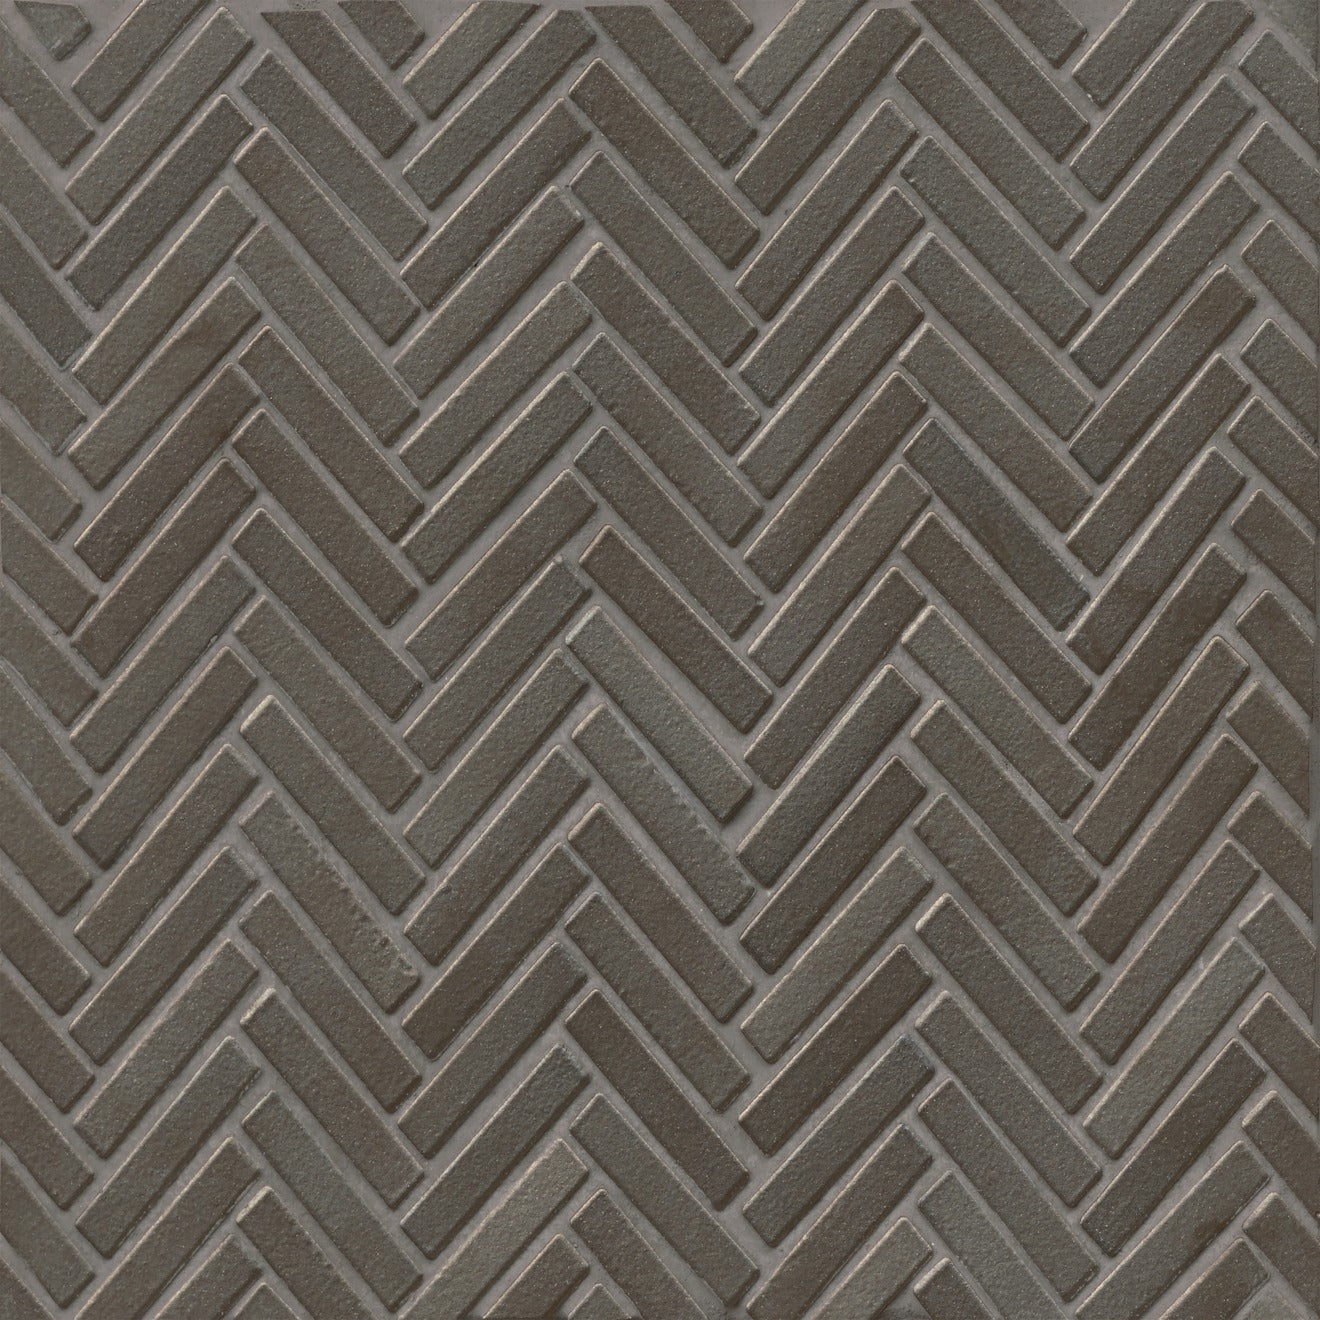 Herringbone tile in the color Metallic on a neutral background. 